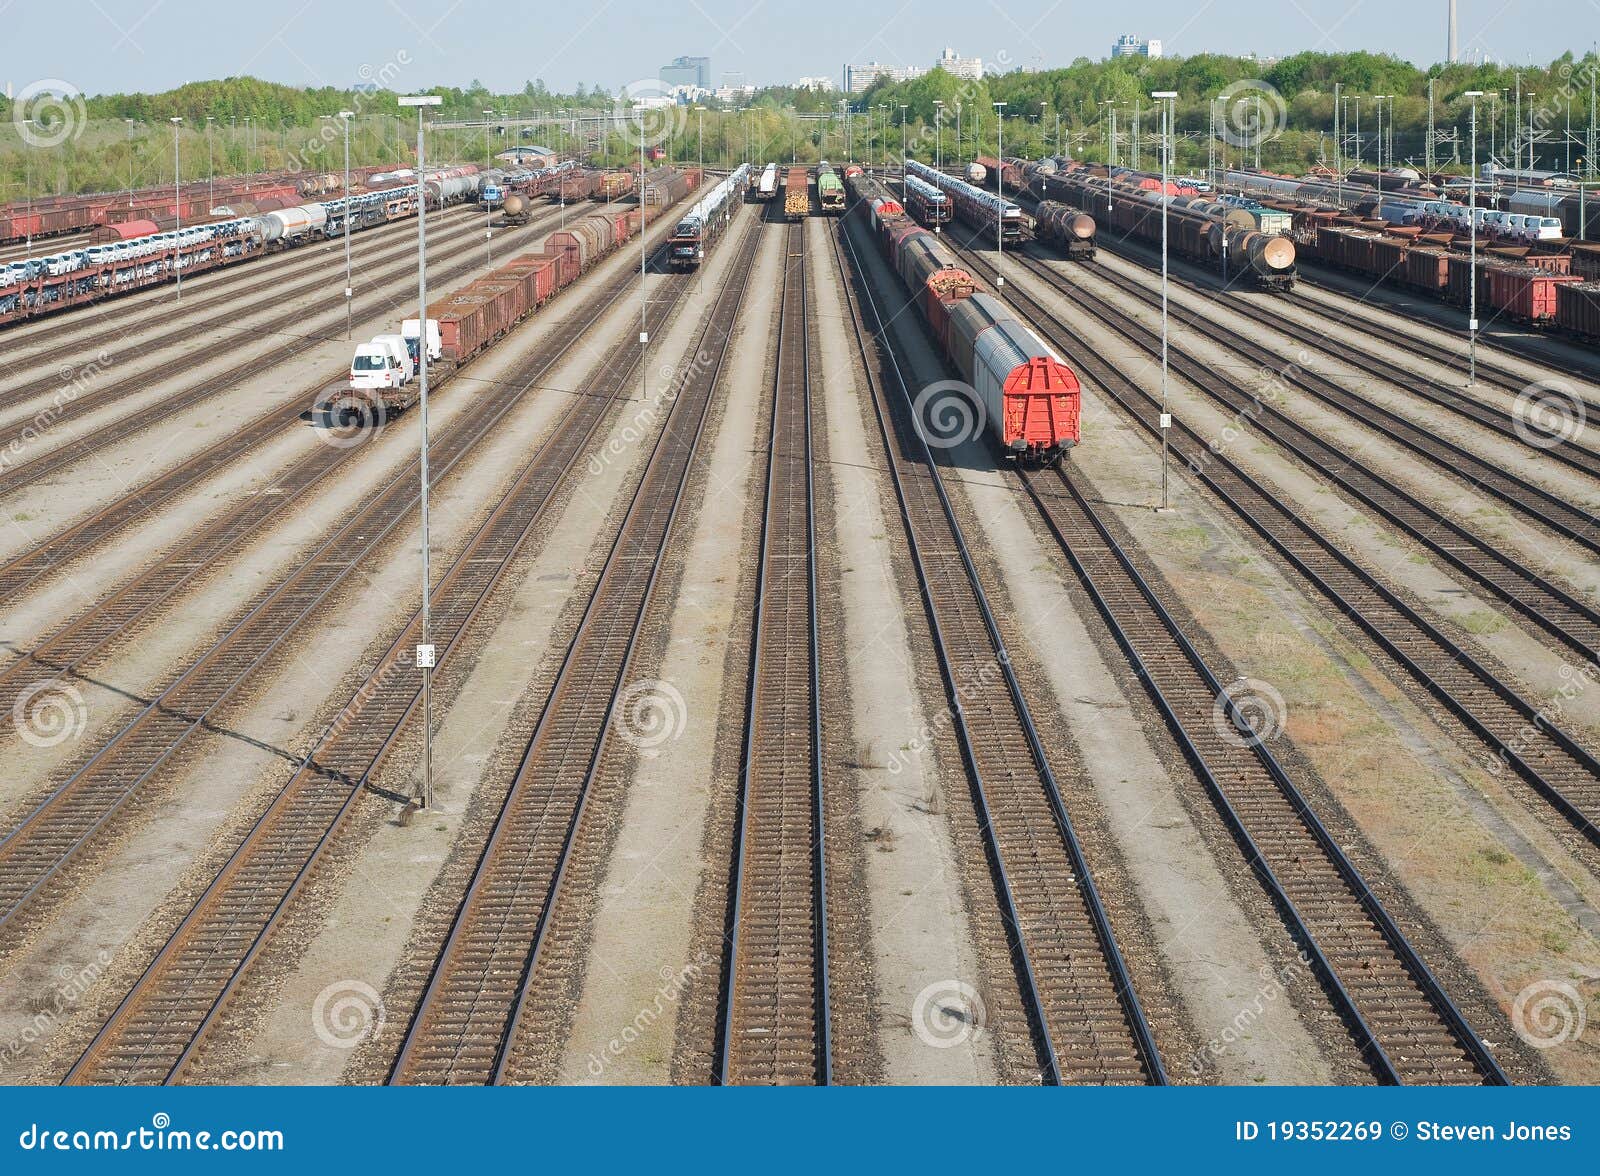 railroad yard with new automobiles